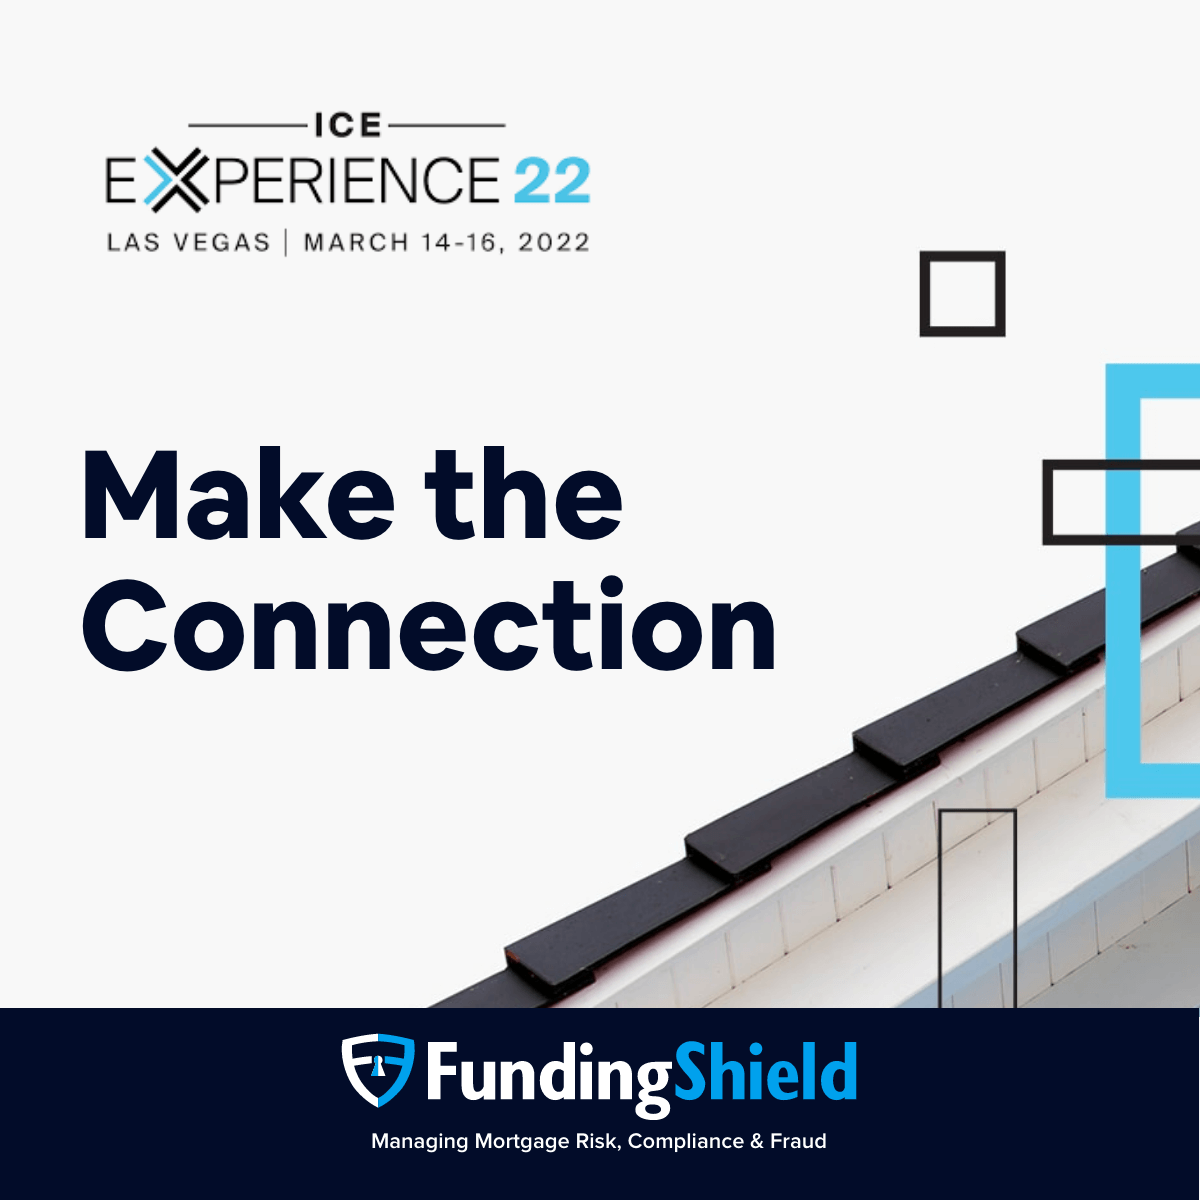 FundingShield attended ICE Mortgage Experience 22